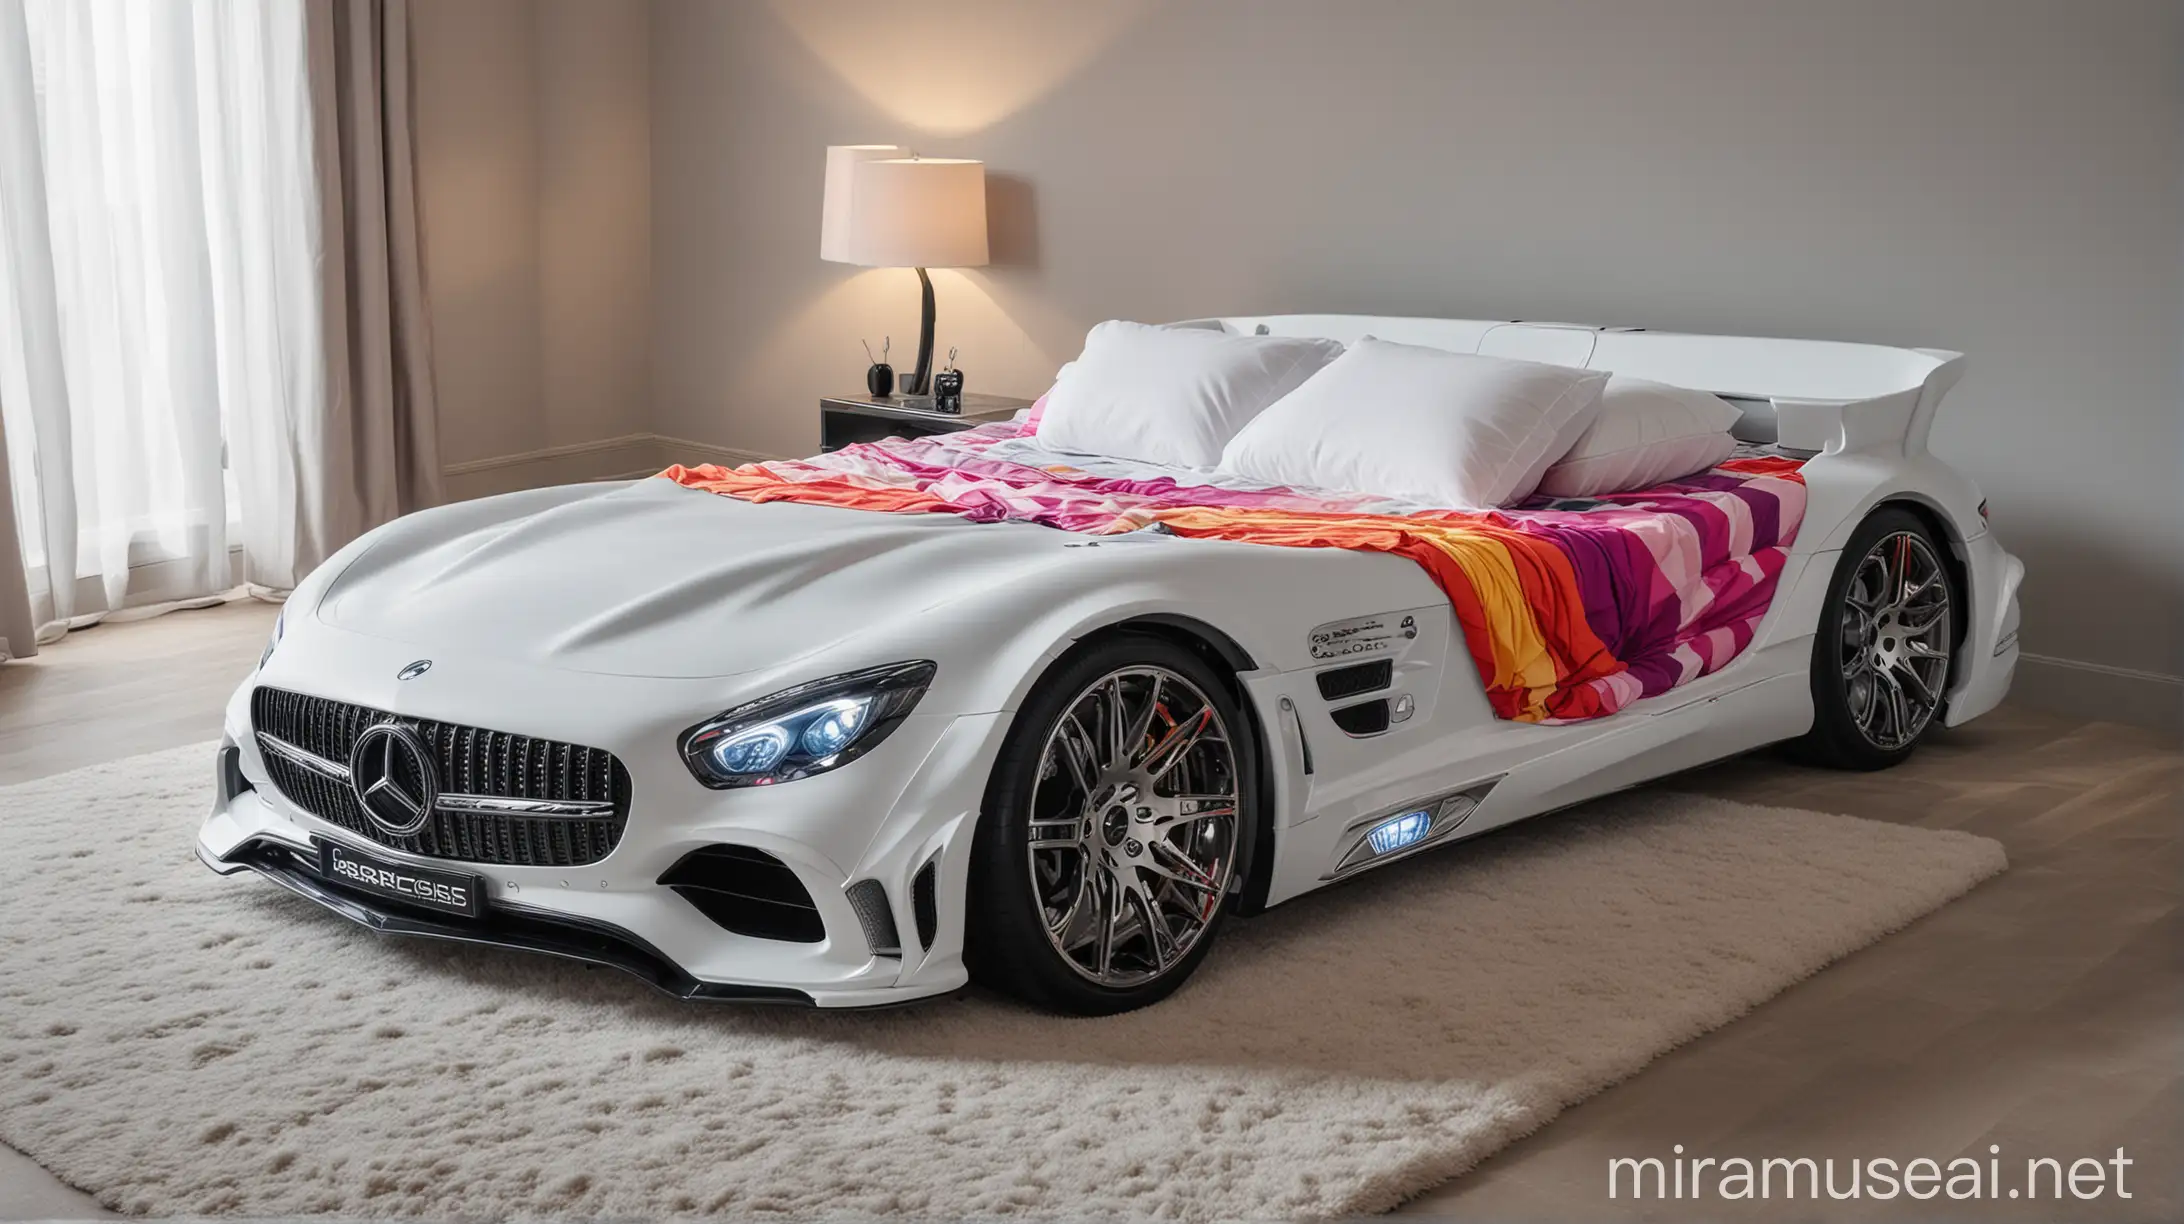 Double bed in the shape of a Mercedes amg car with headlights on, with brightly colored bedding